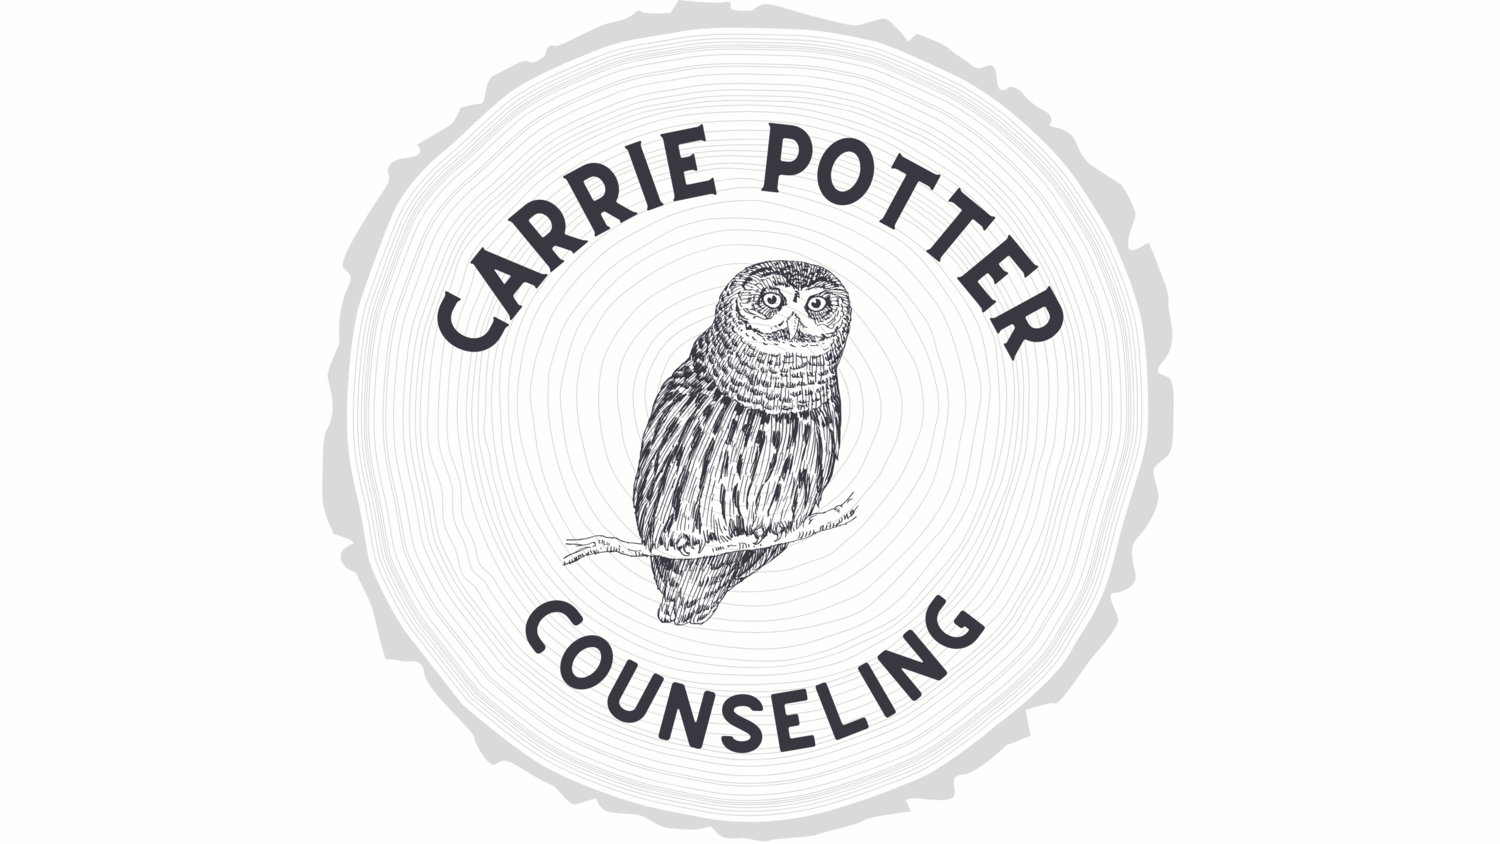 Carrie Potter Counseling logo